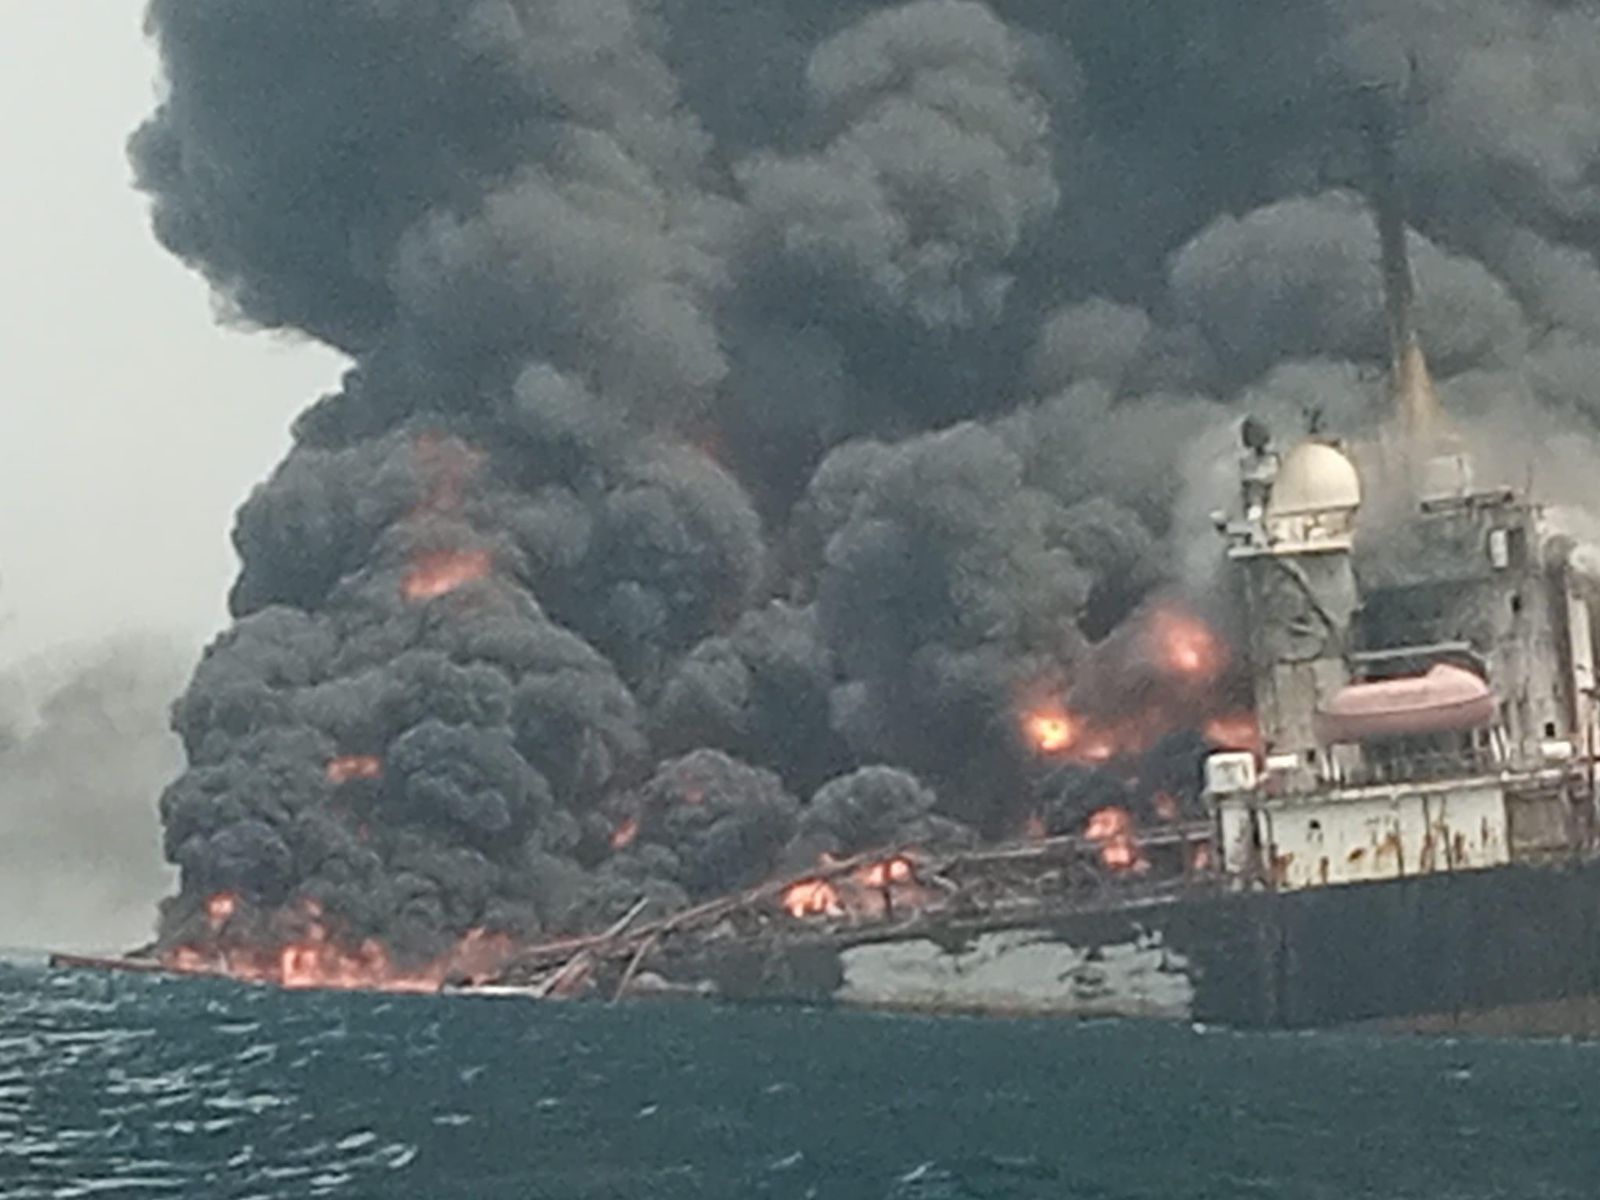 Update on Exploded Vessel at Escravos (Ugborodo): Three survive, 12 persons unaccounted for